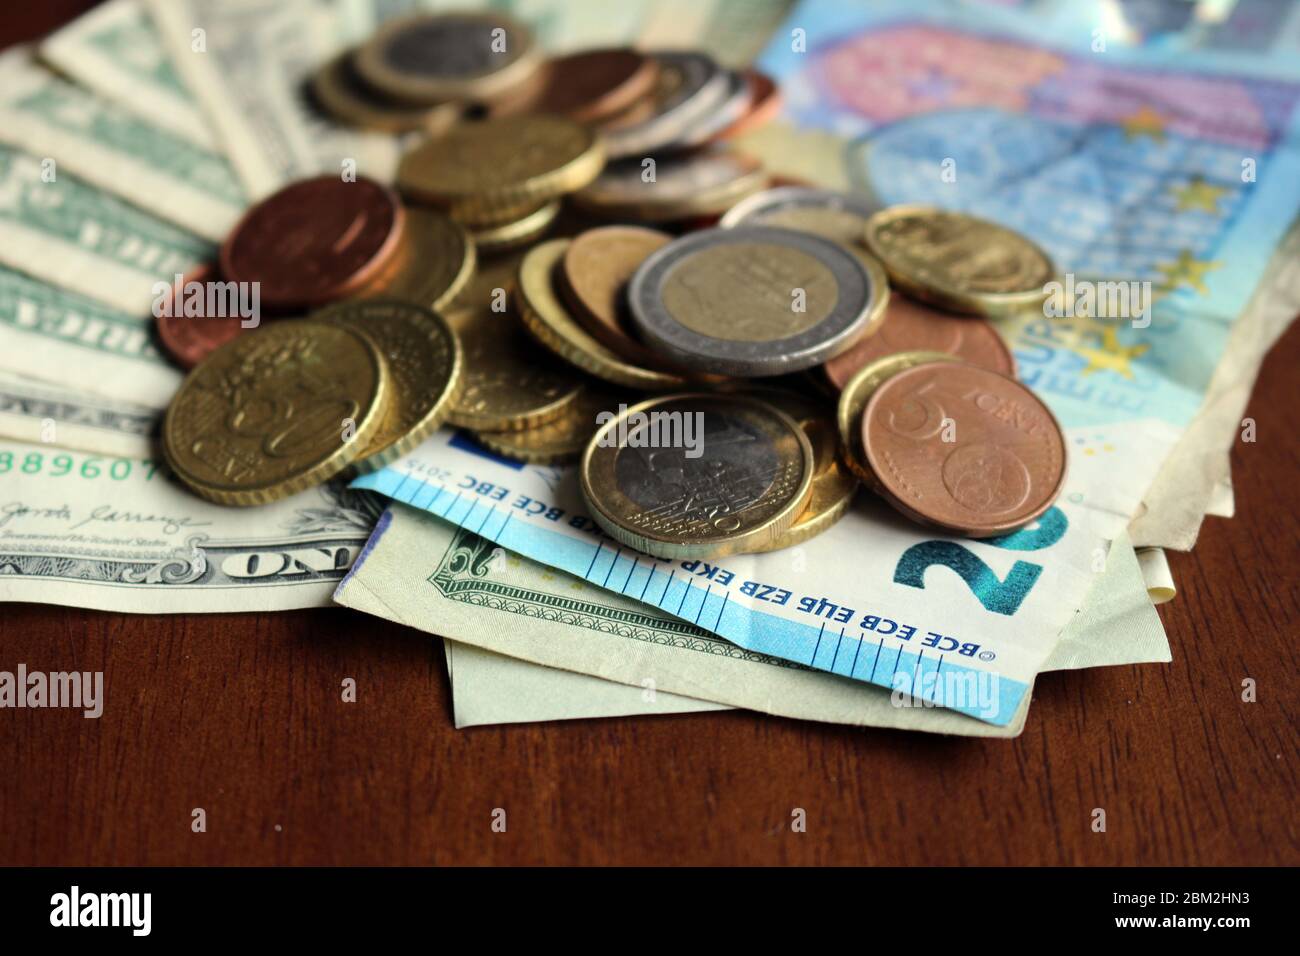 Money - after Covid-19 how will the circulation of coins Stock Photo